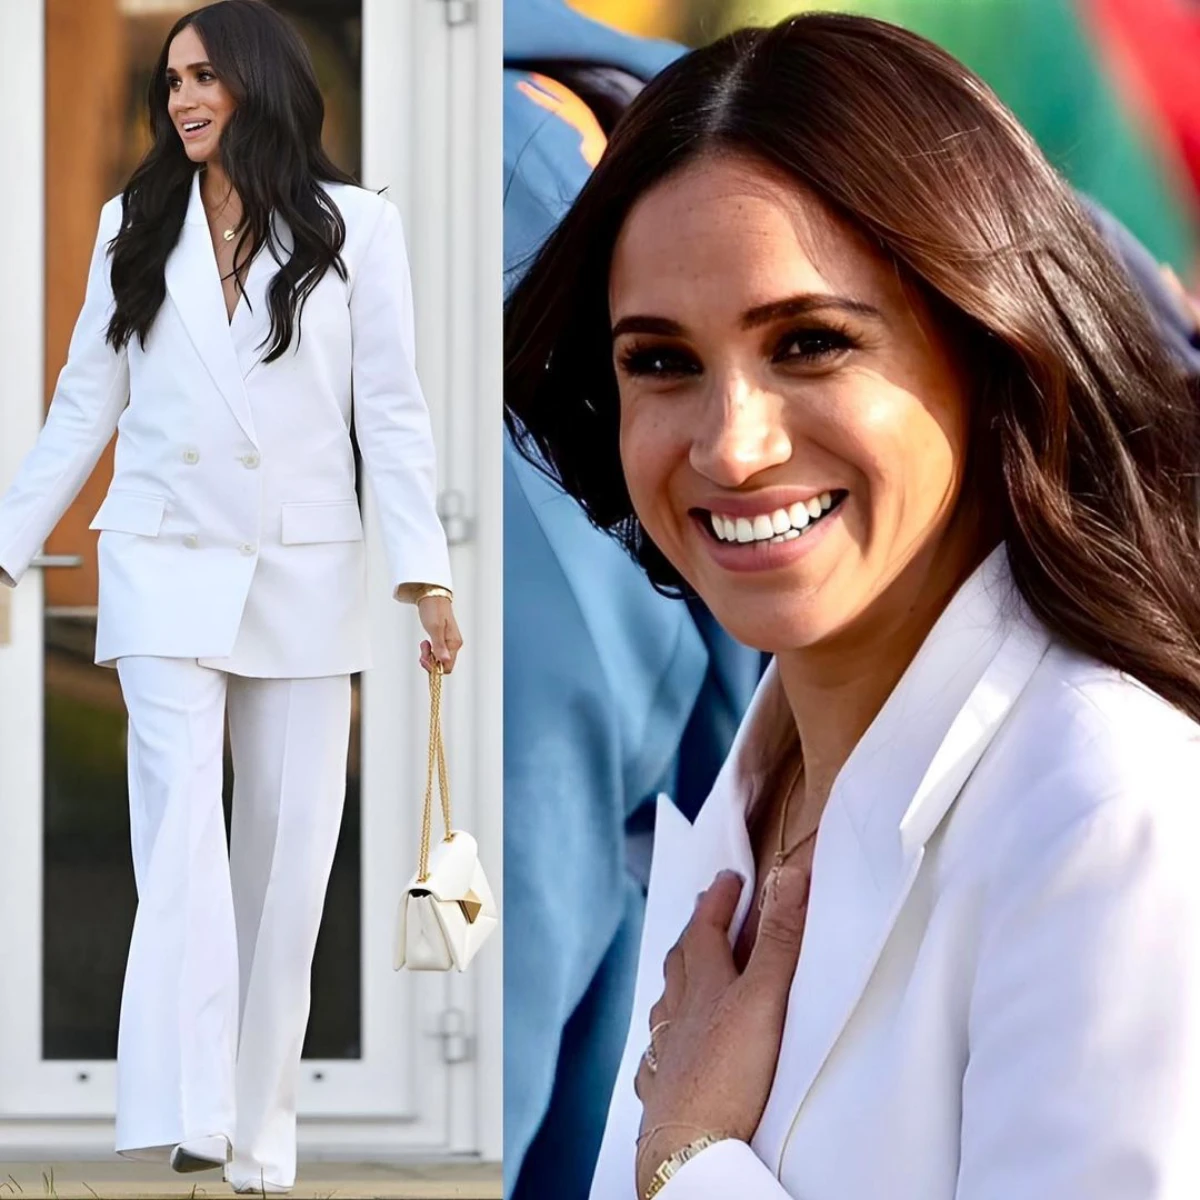 meghan markle in white suit and brown hair